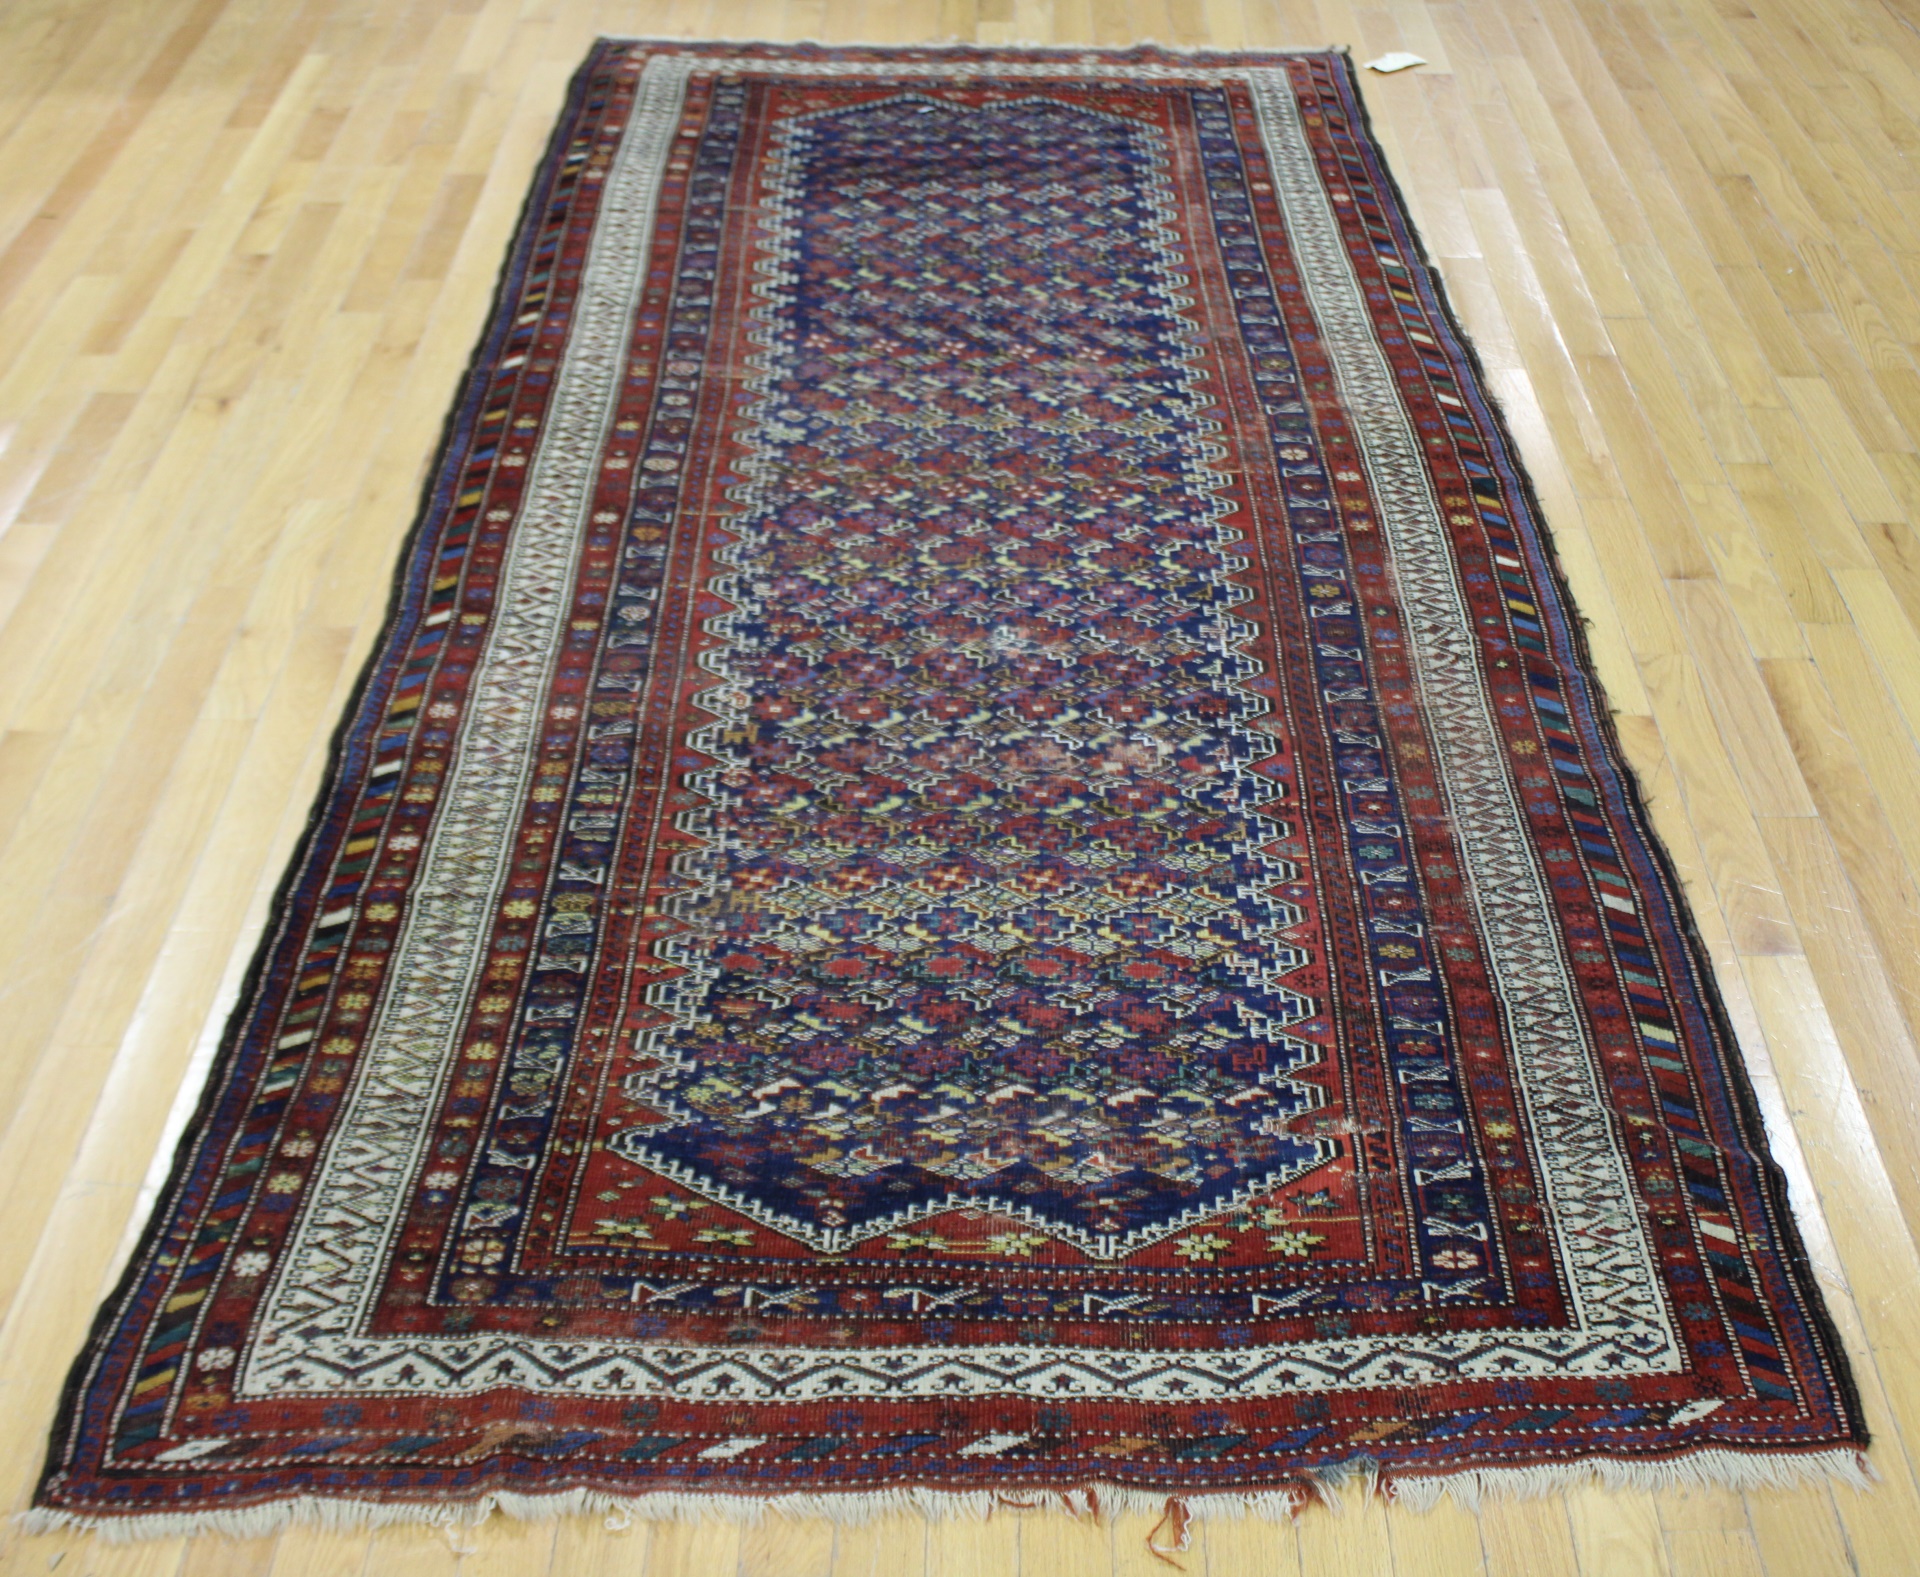 ANTIQUE AND FINELY HAND WOVEN KURDISH